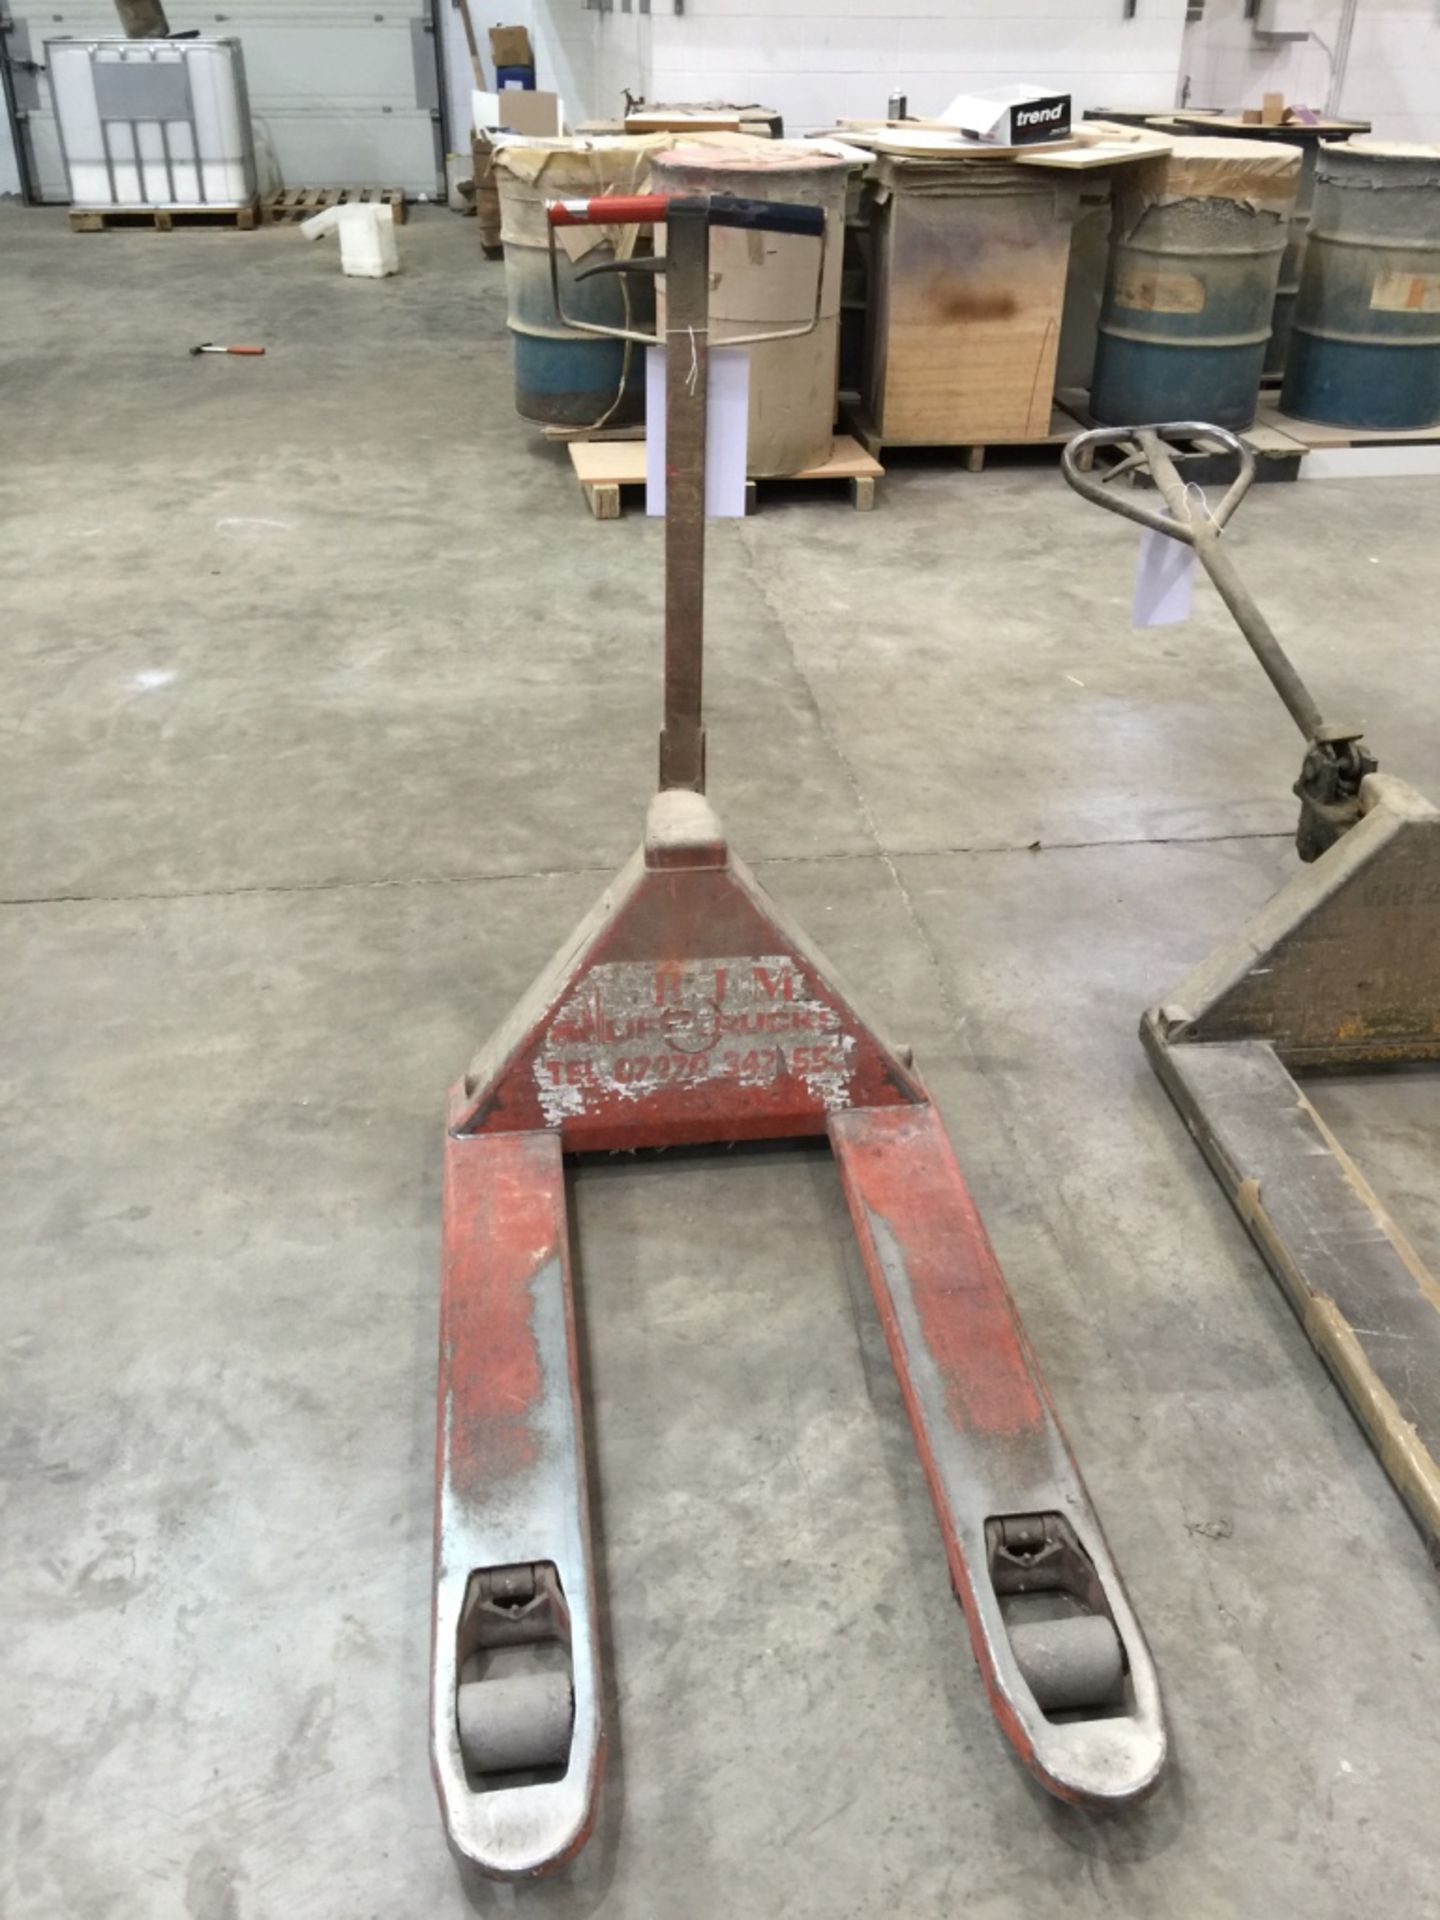 BT Lifter Hydraulic Pallet Truck. Max 2000kg (Ple - Image 4 of 4